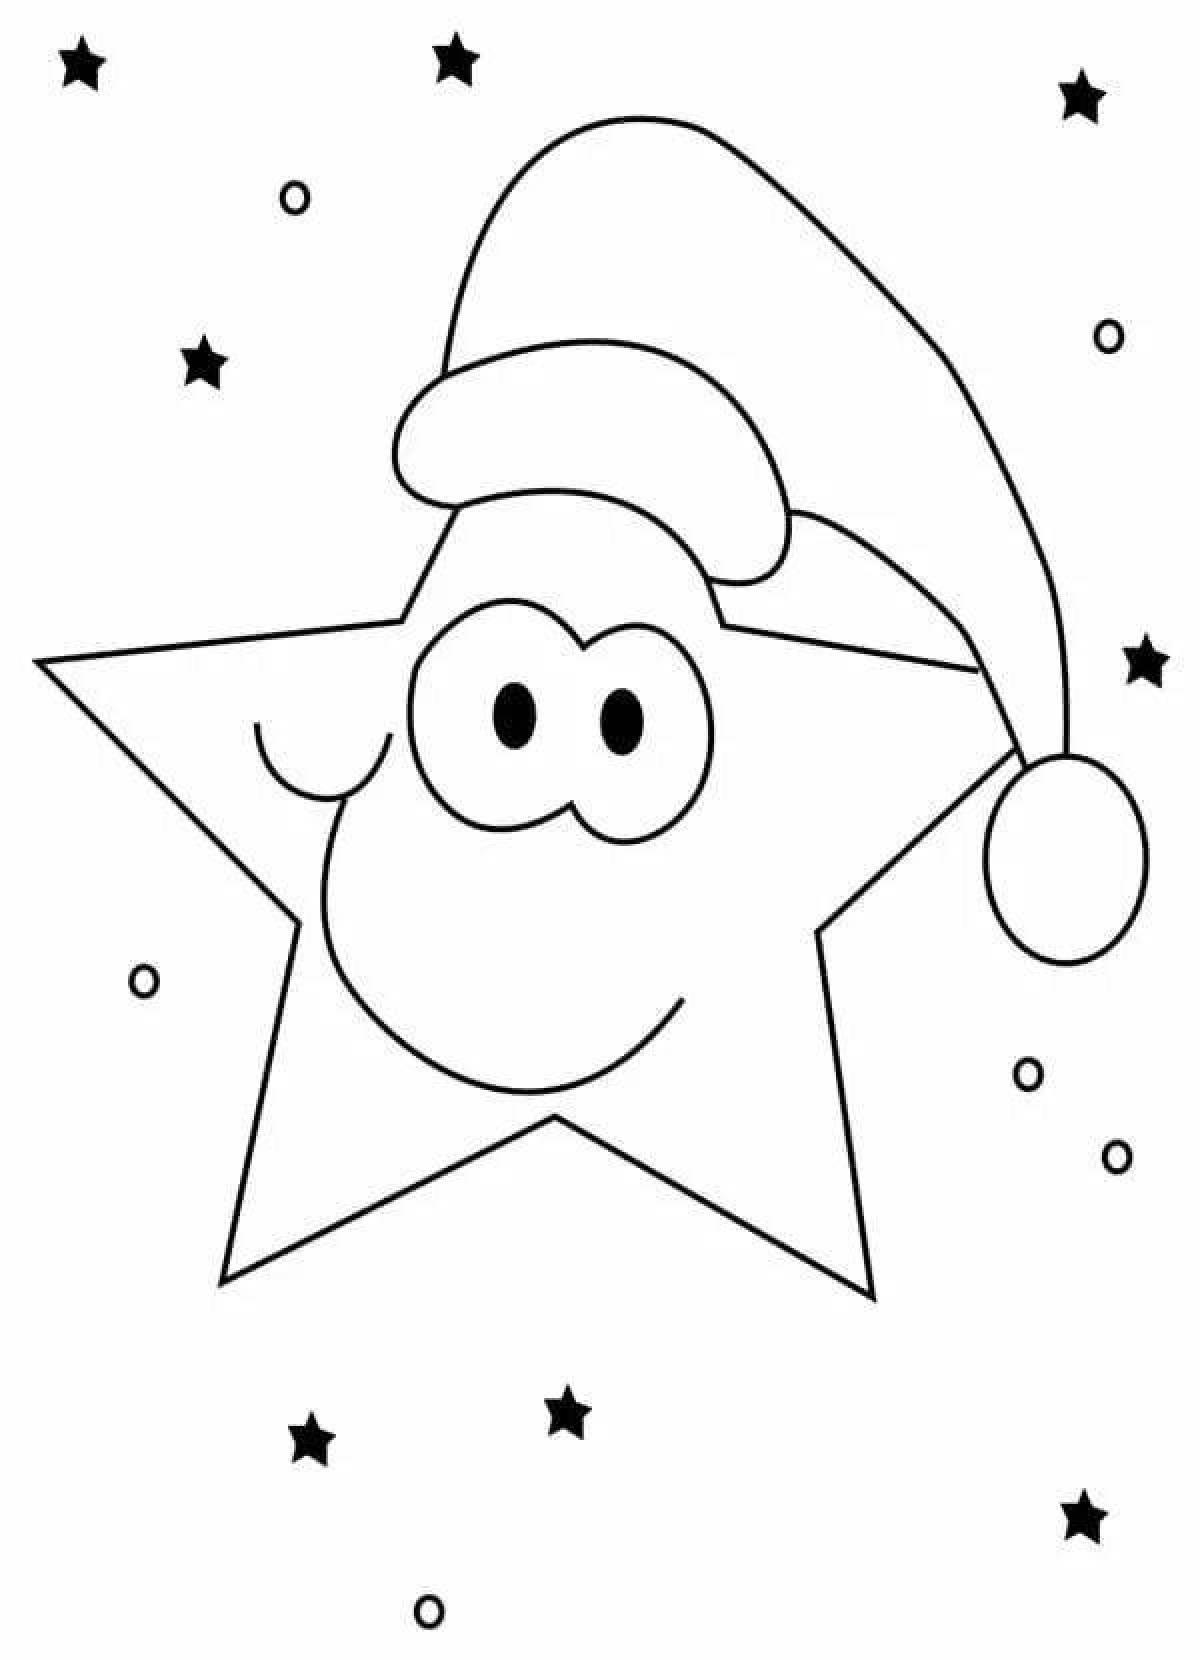 Coloring book sparkling Christmas star